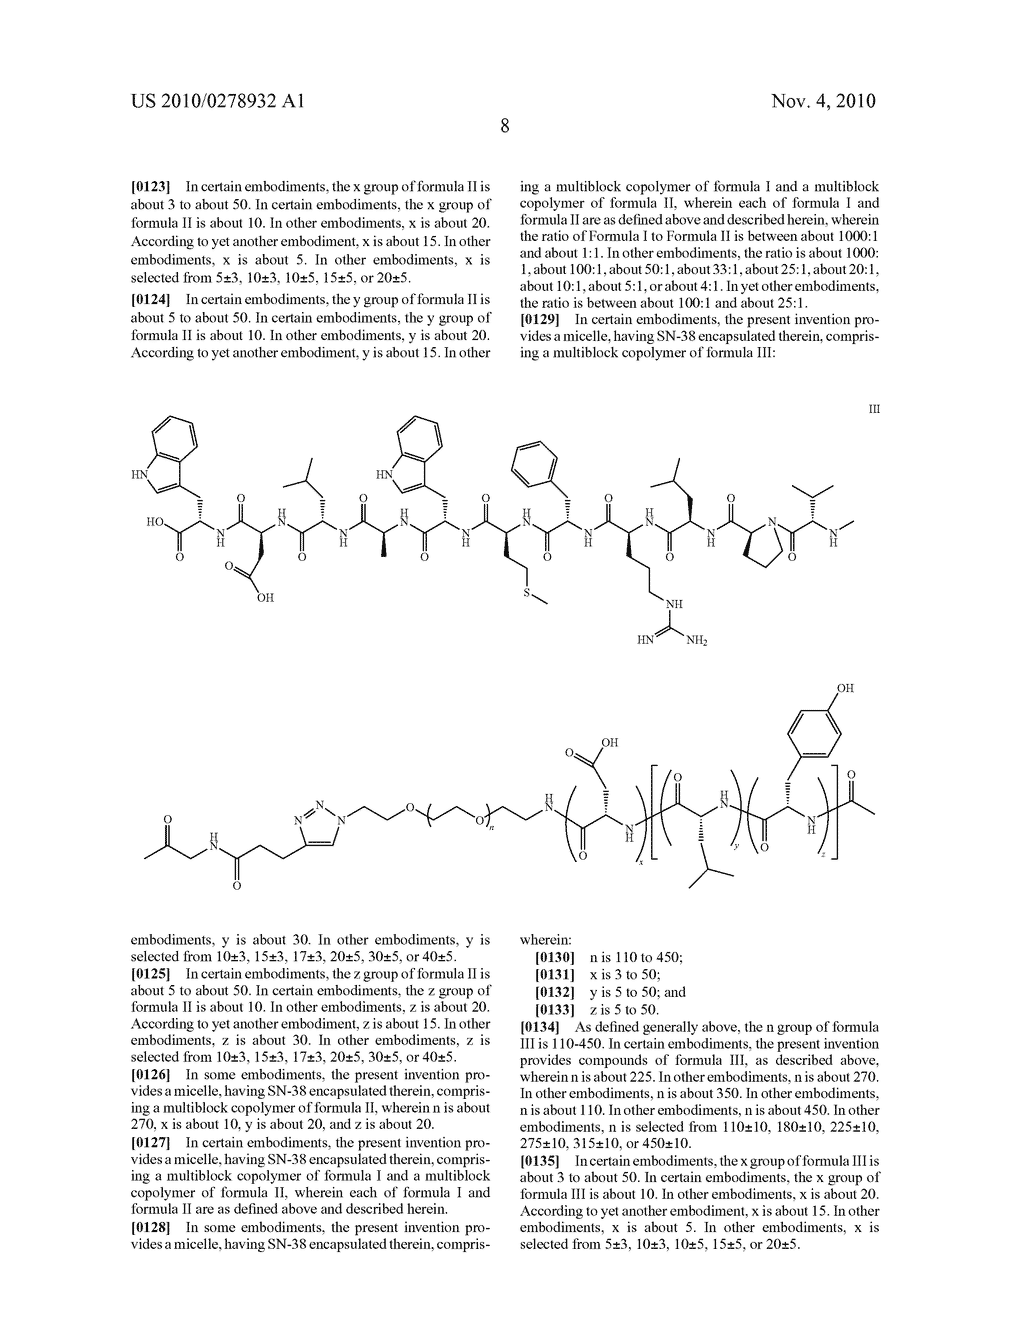 POLYMER MICELLES CONTAINING SN-38 FOR THE TREATMENT OF CANCER - diagram, schematic, and image 53